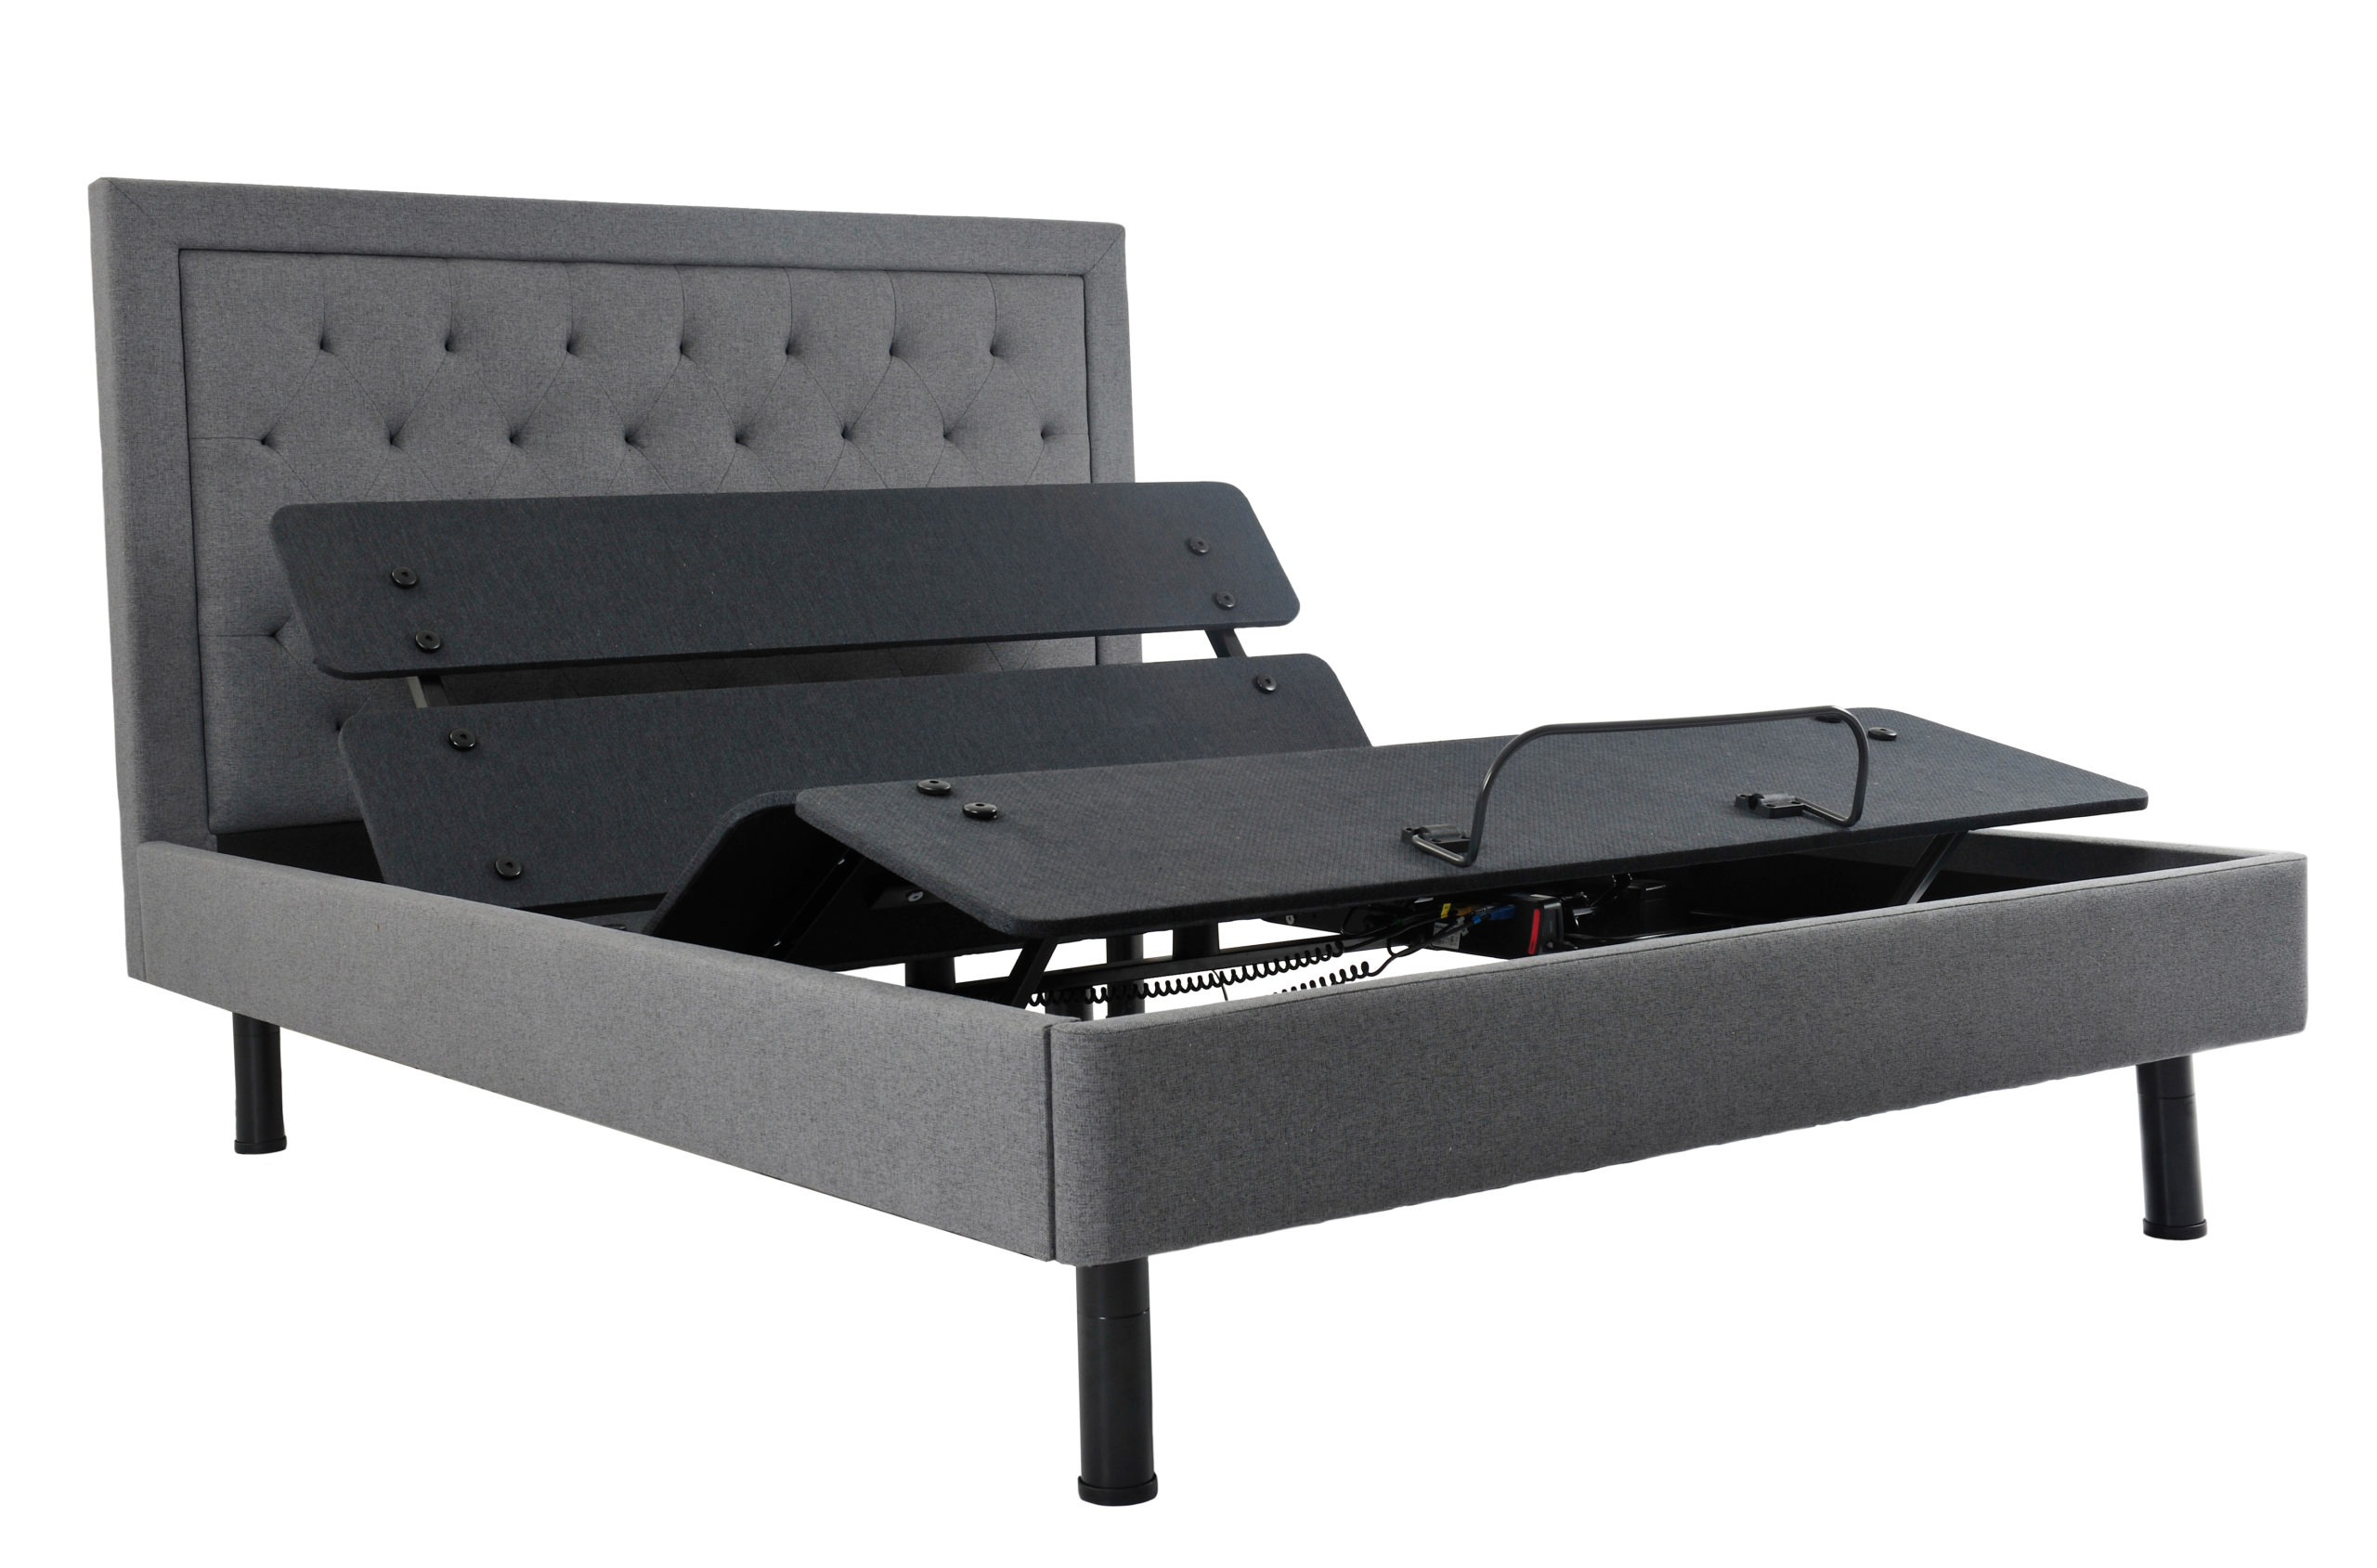 NH200SA Base with charcoal grey upholstered tufted headboard and bed frame shown in adjusted position with head and foot of bed elevated.